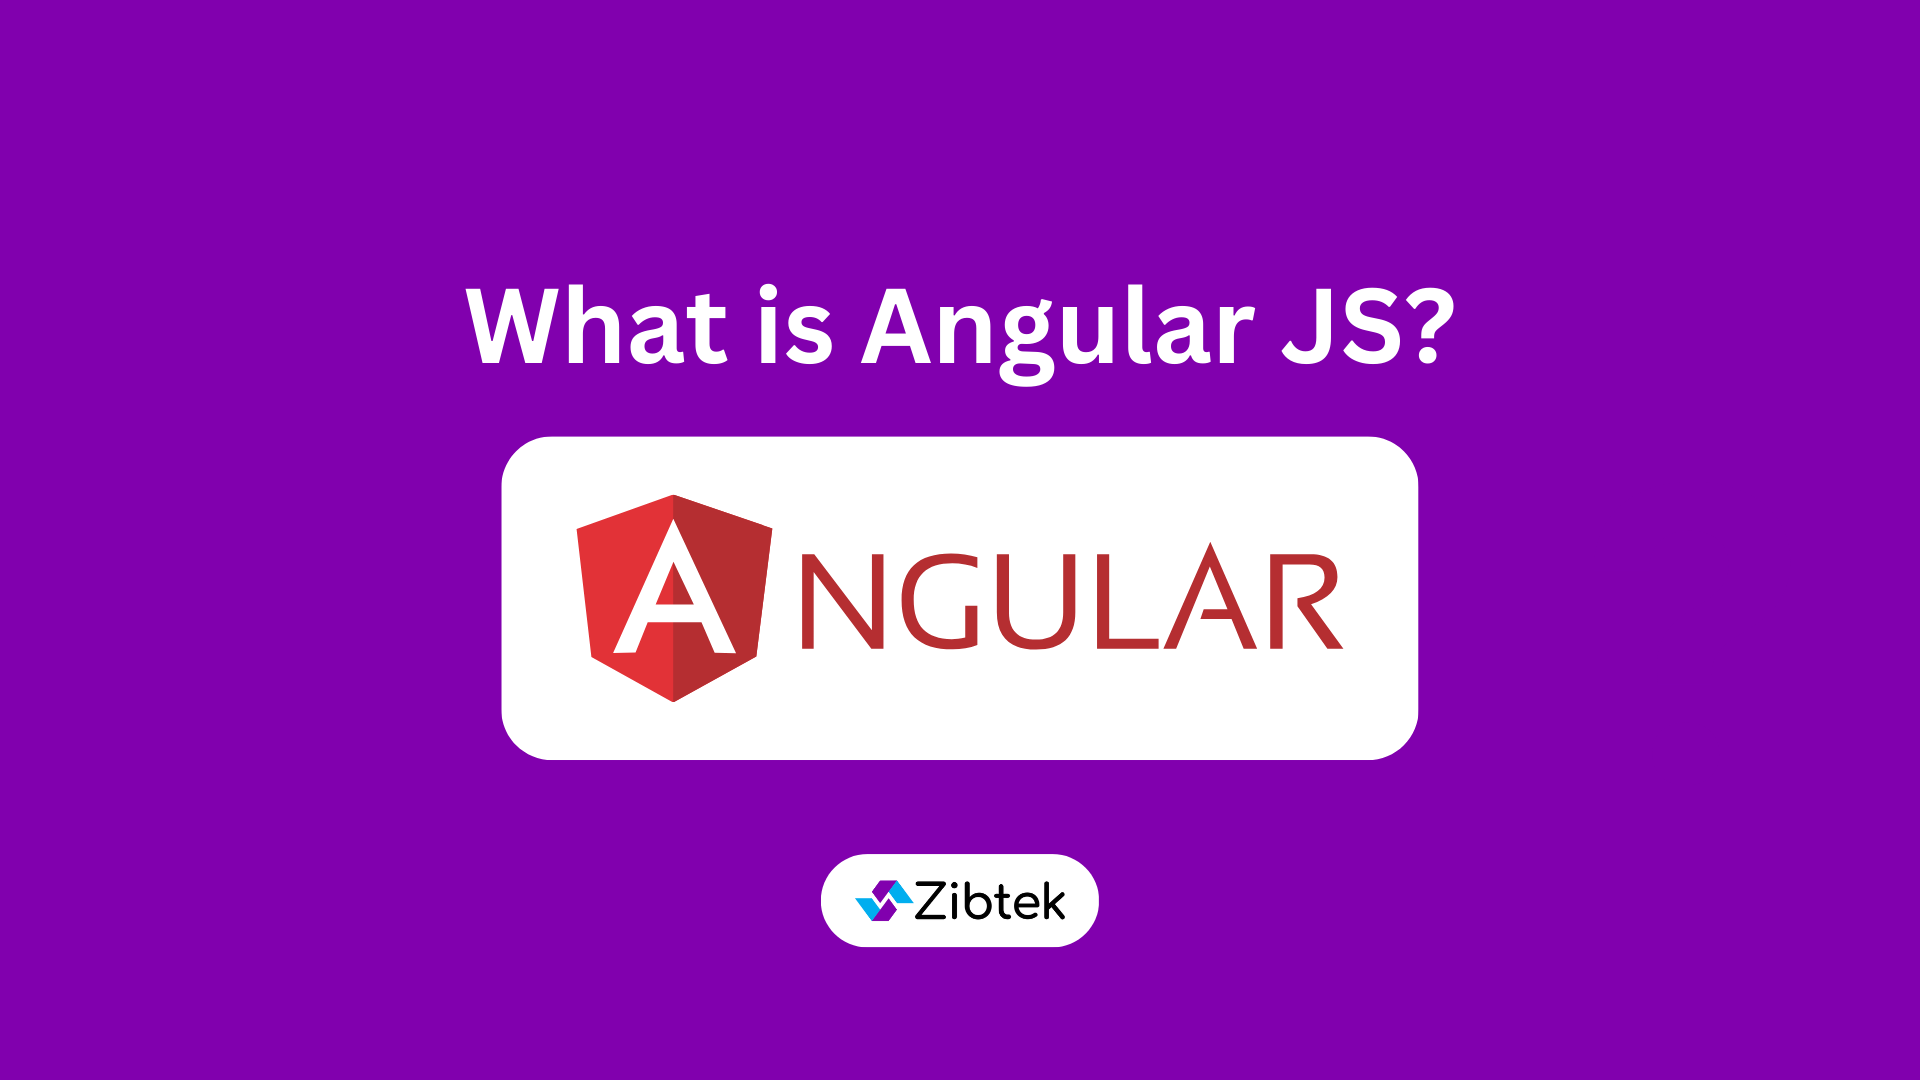 Graphic describing what Angular JS is